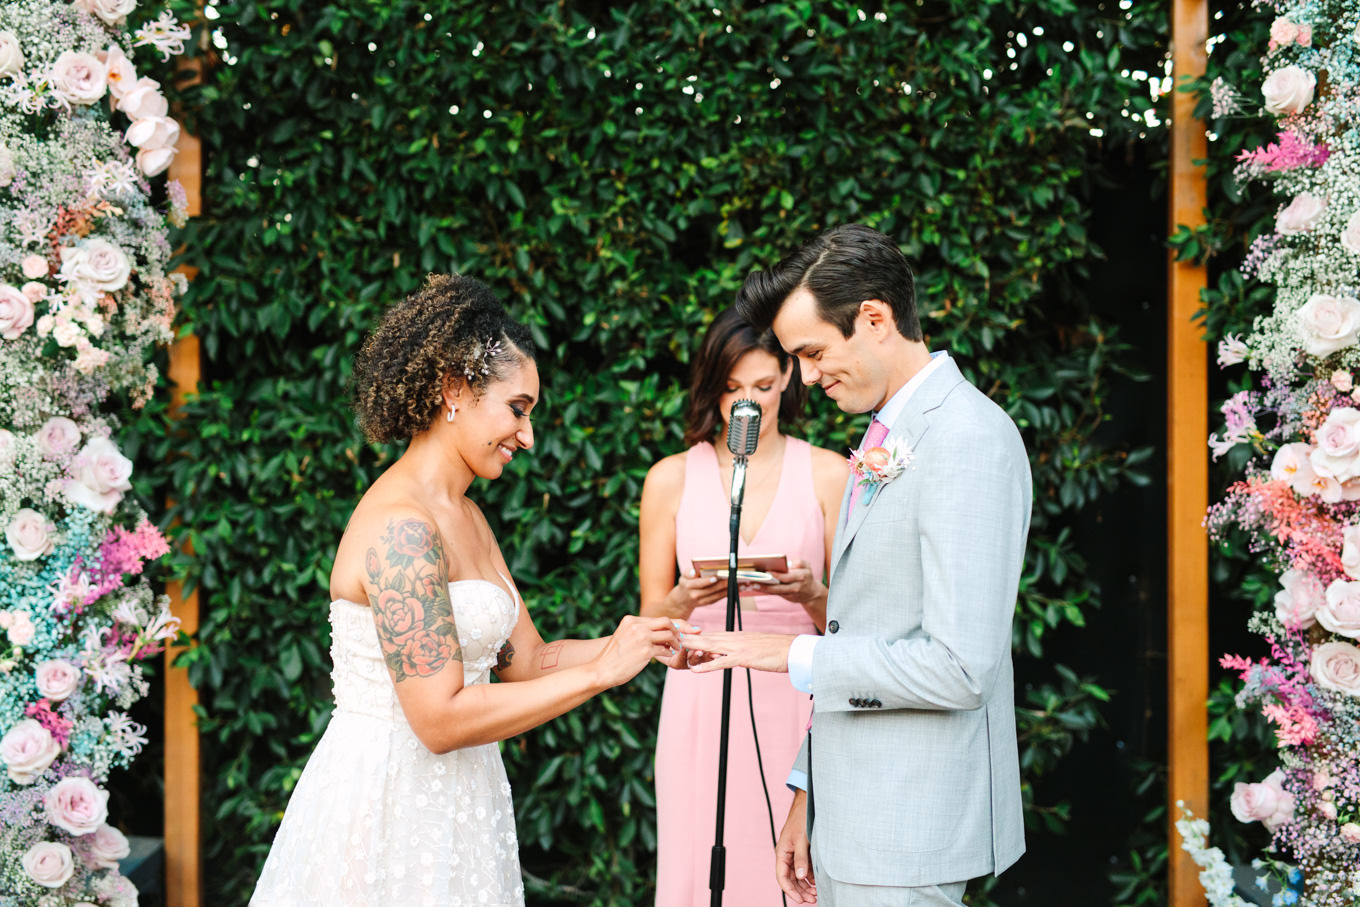 Ring exchange during wedding ceremony | Colorful pop-up micro wedding at The Ruby Street Los Angeles featured on Green Wedding Shoes | Colorful and elevated photography for fun-loving couples in Southern California | #colorfulwedding #popupwedding #weddingphotography #microwedding Source: Mary Costa Photography | Los Angeles